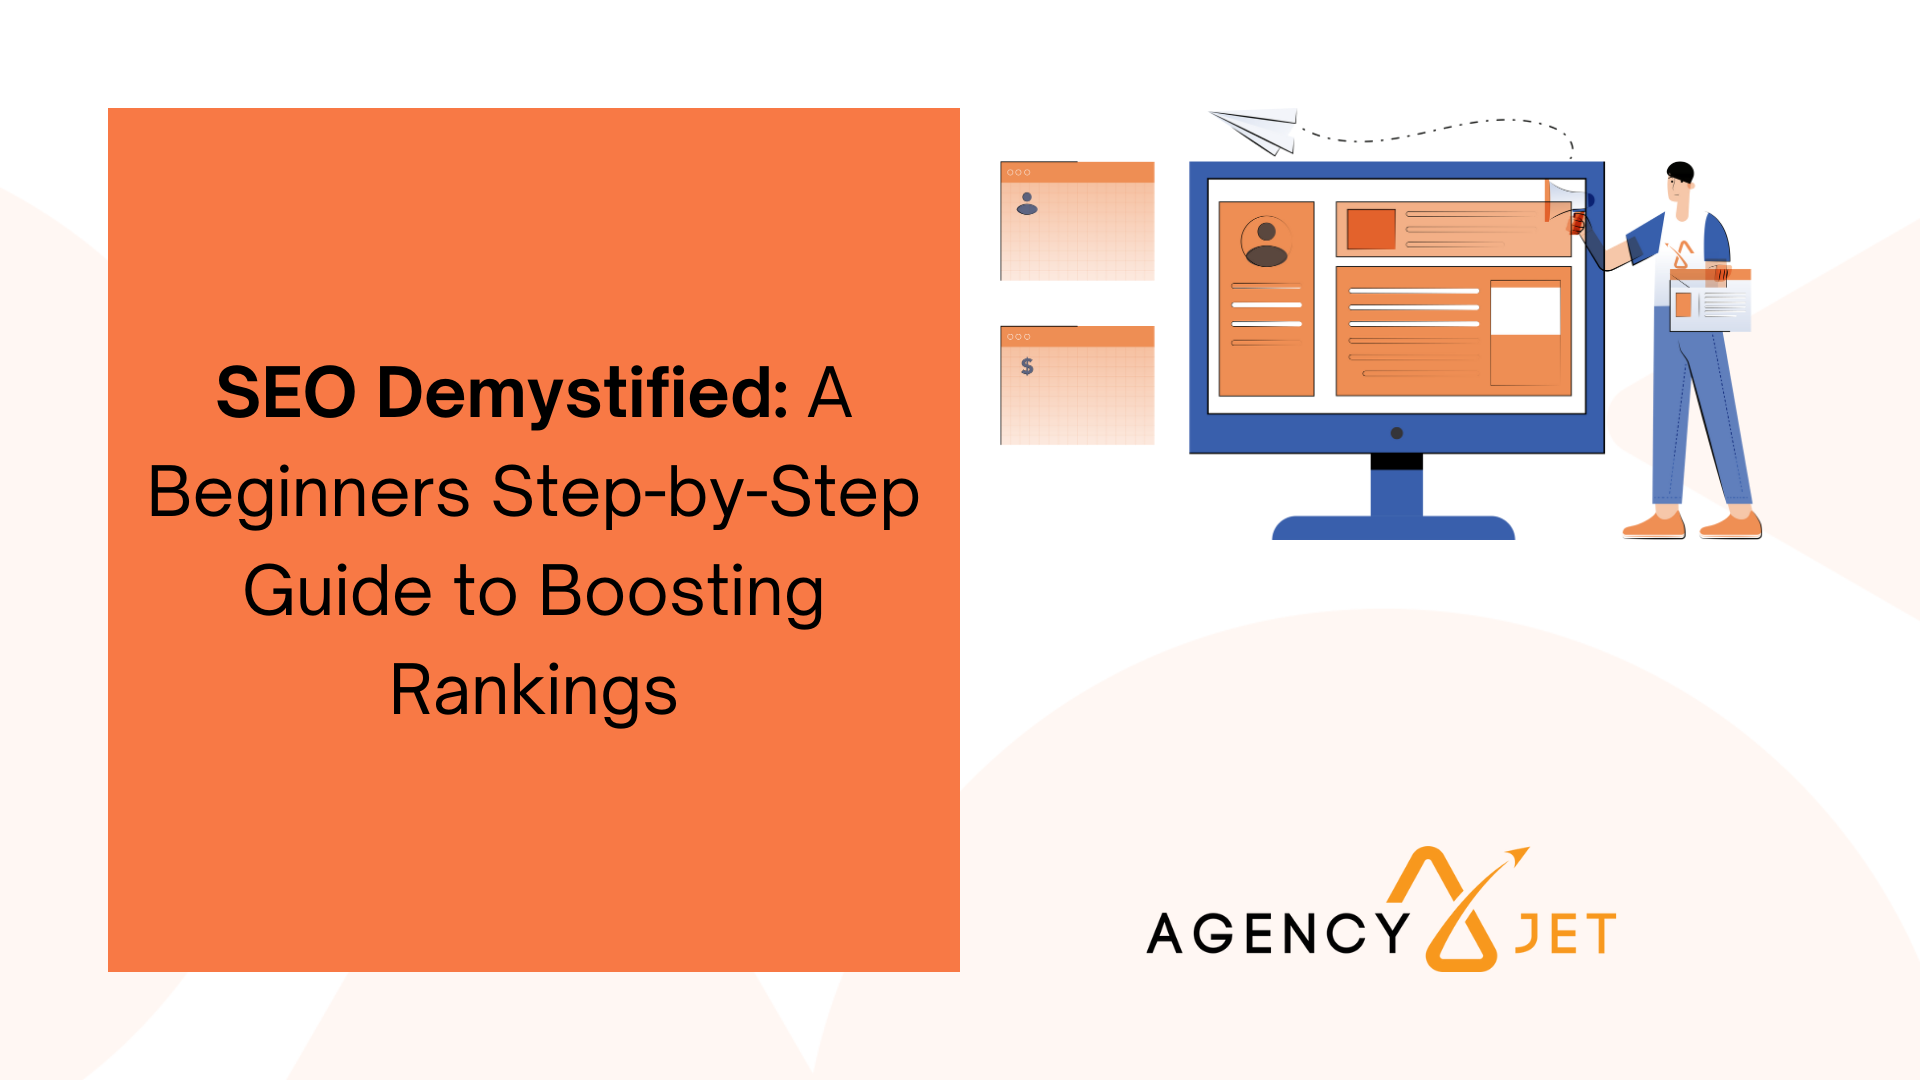 SEO Demystified: A Beginners Step-by-Step Guide to Boosting Rankings